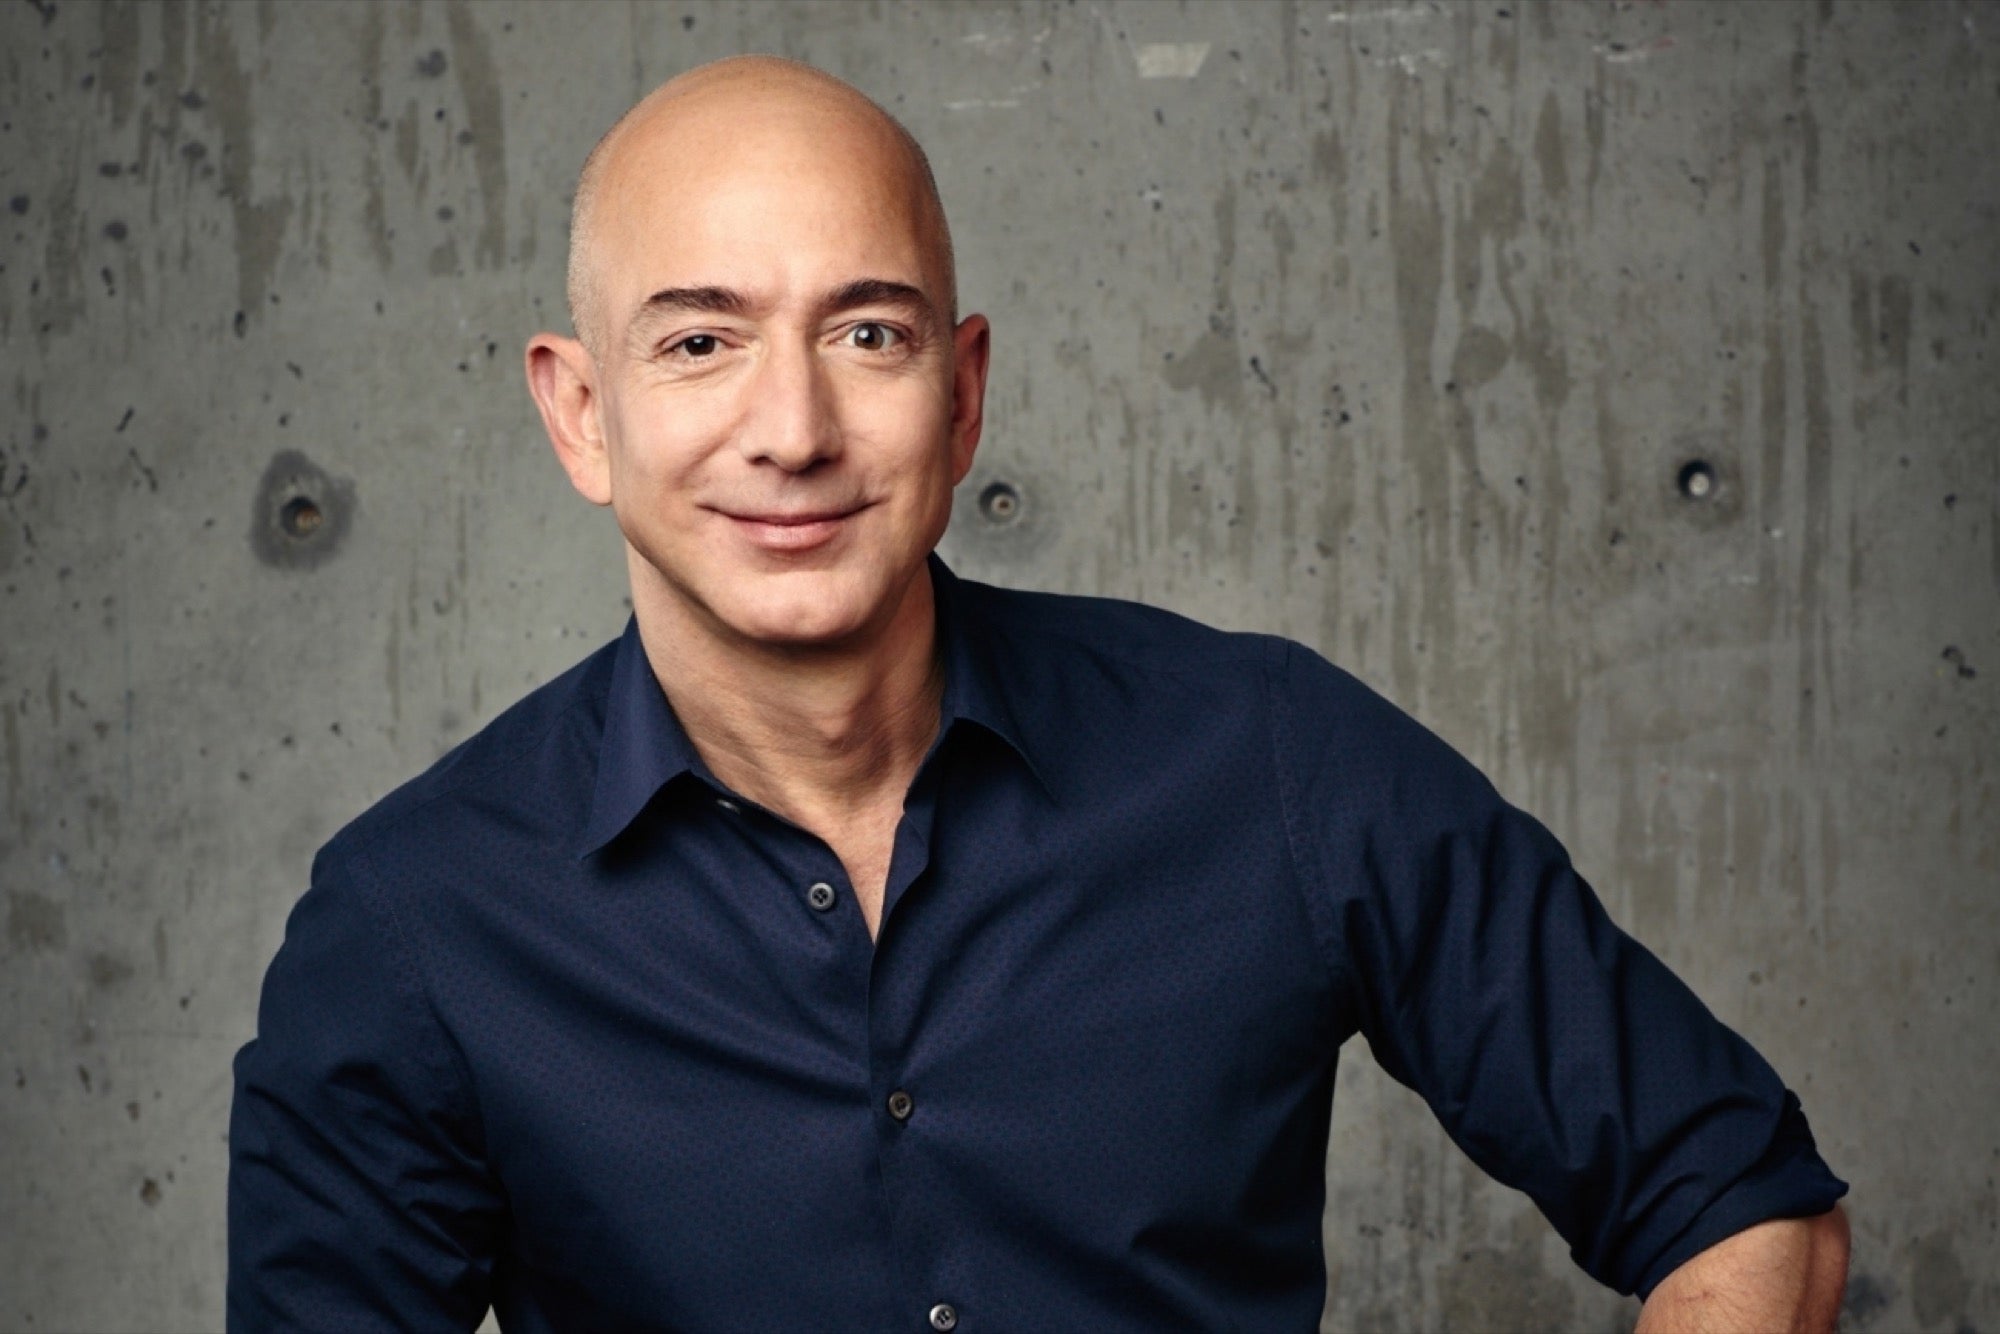 Jeff Bezos Supports African fintech startup Chipper Cash and raises $30M